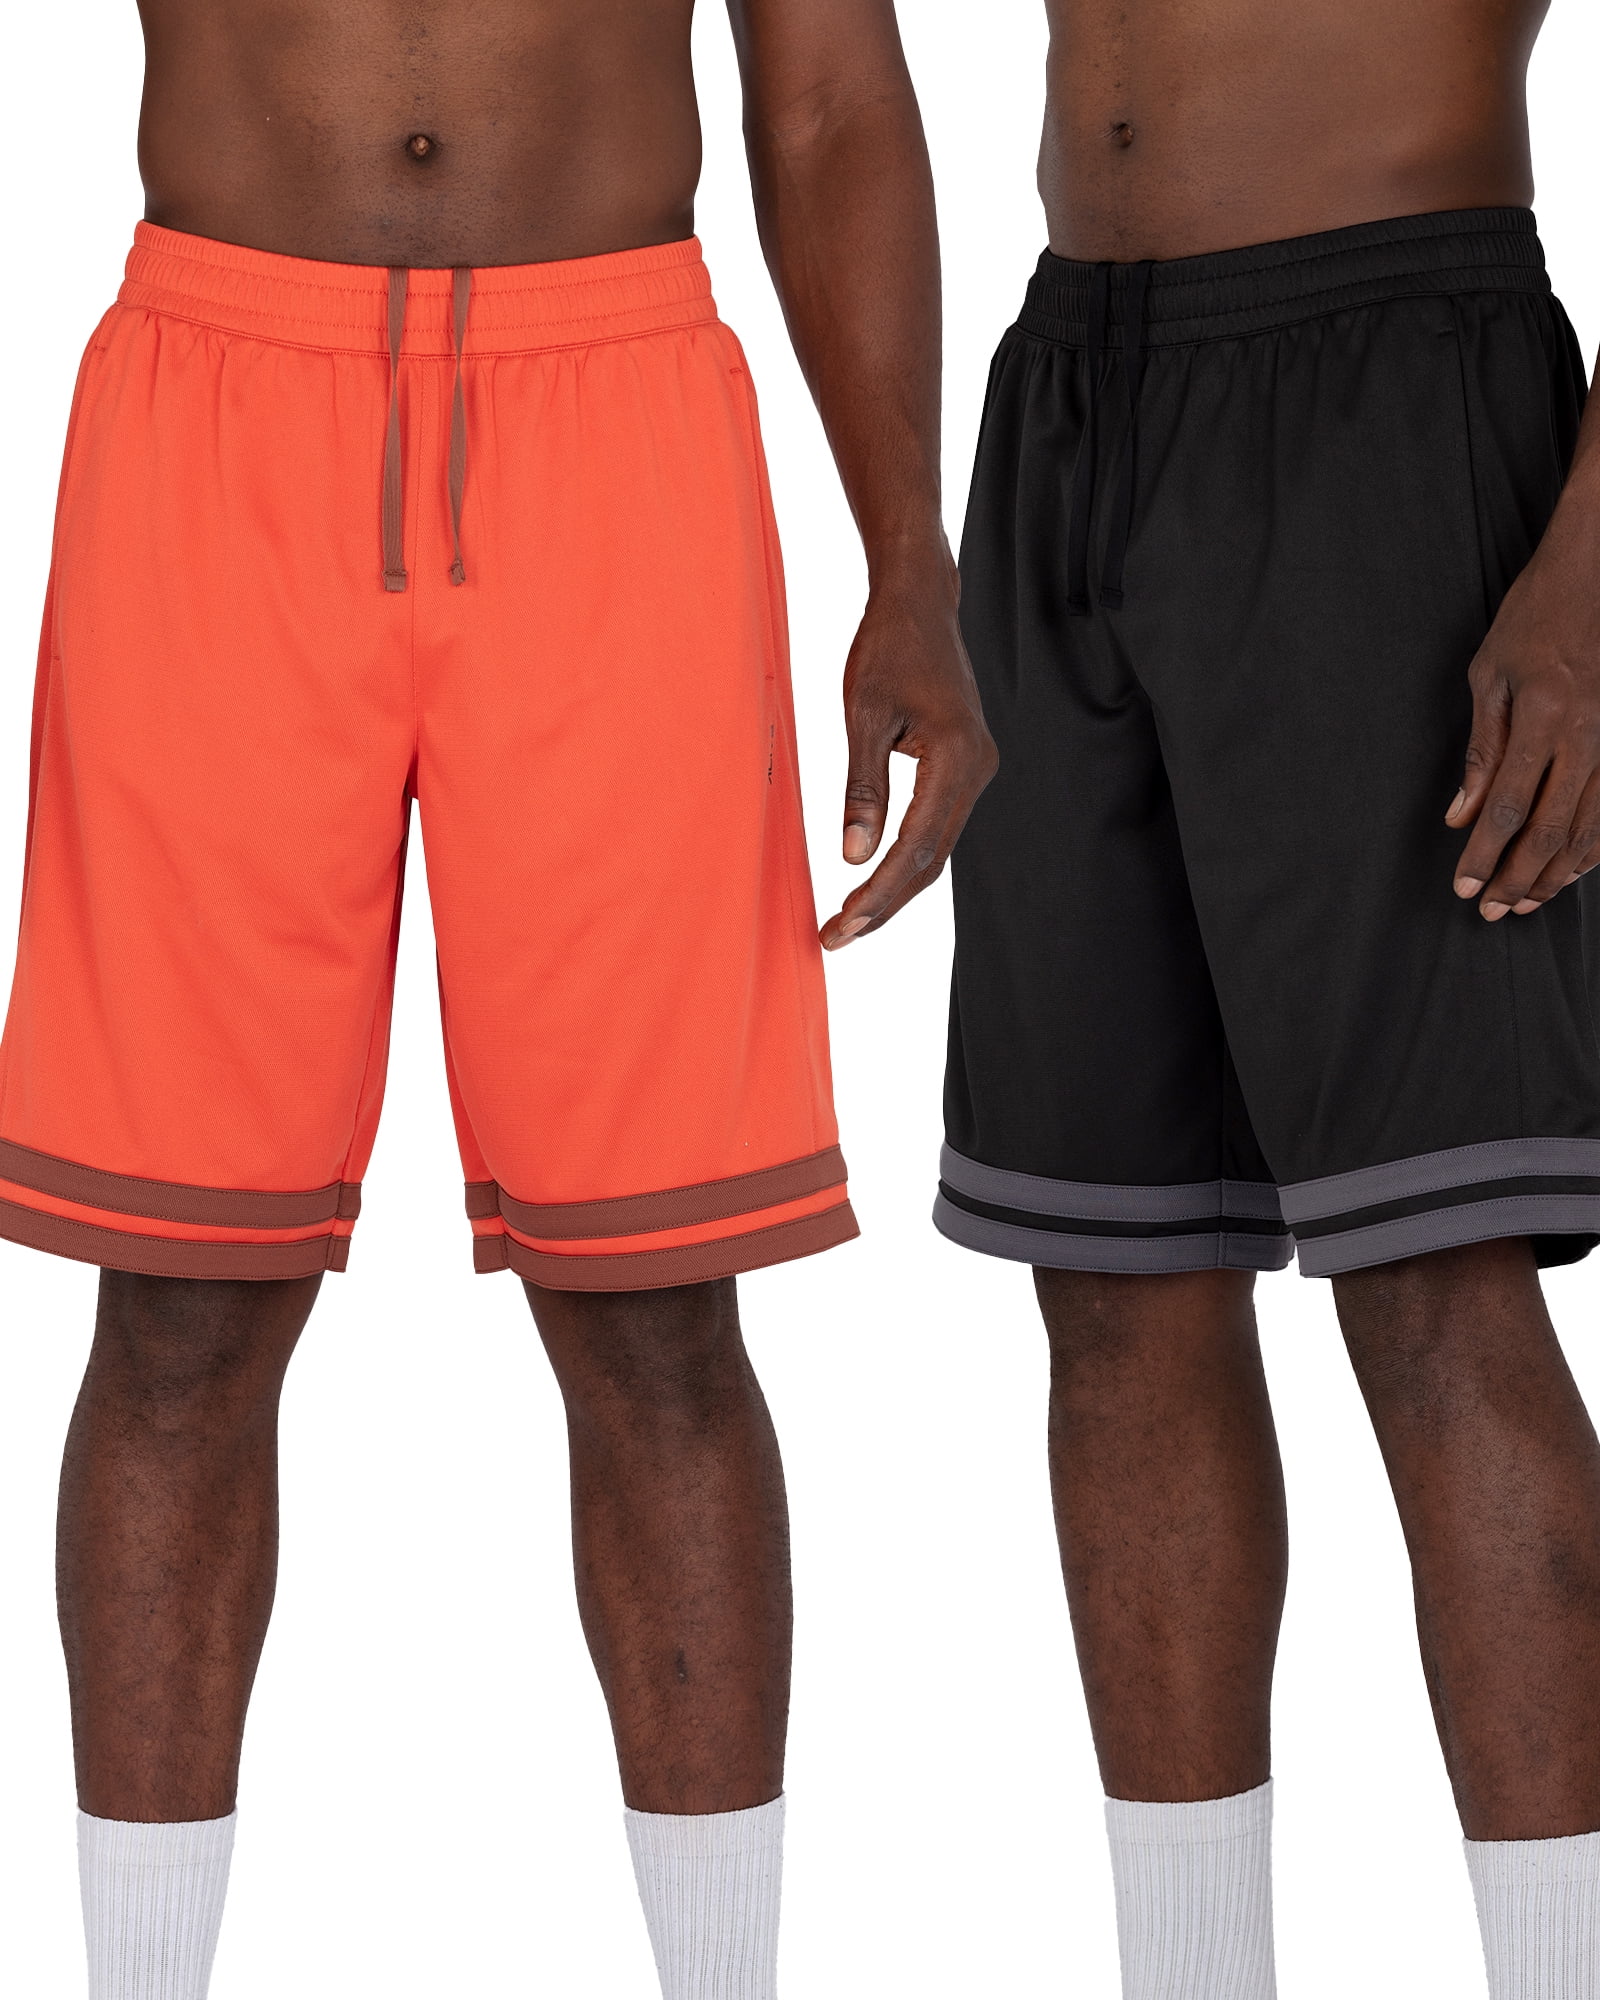 Alive Men's Shorts- 2 Pack Basketball Shorts 11 Inch Inseam 